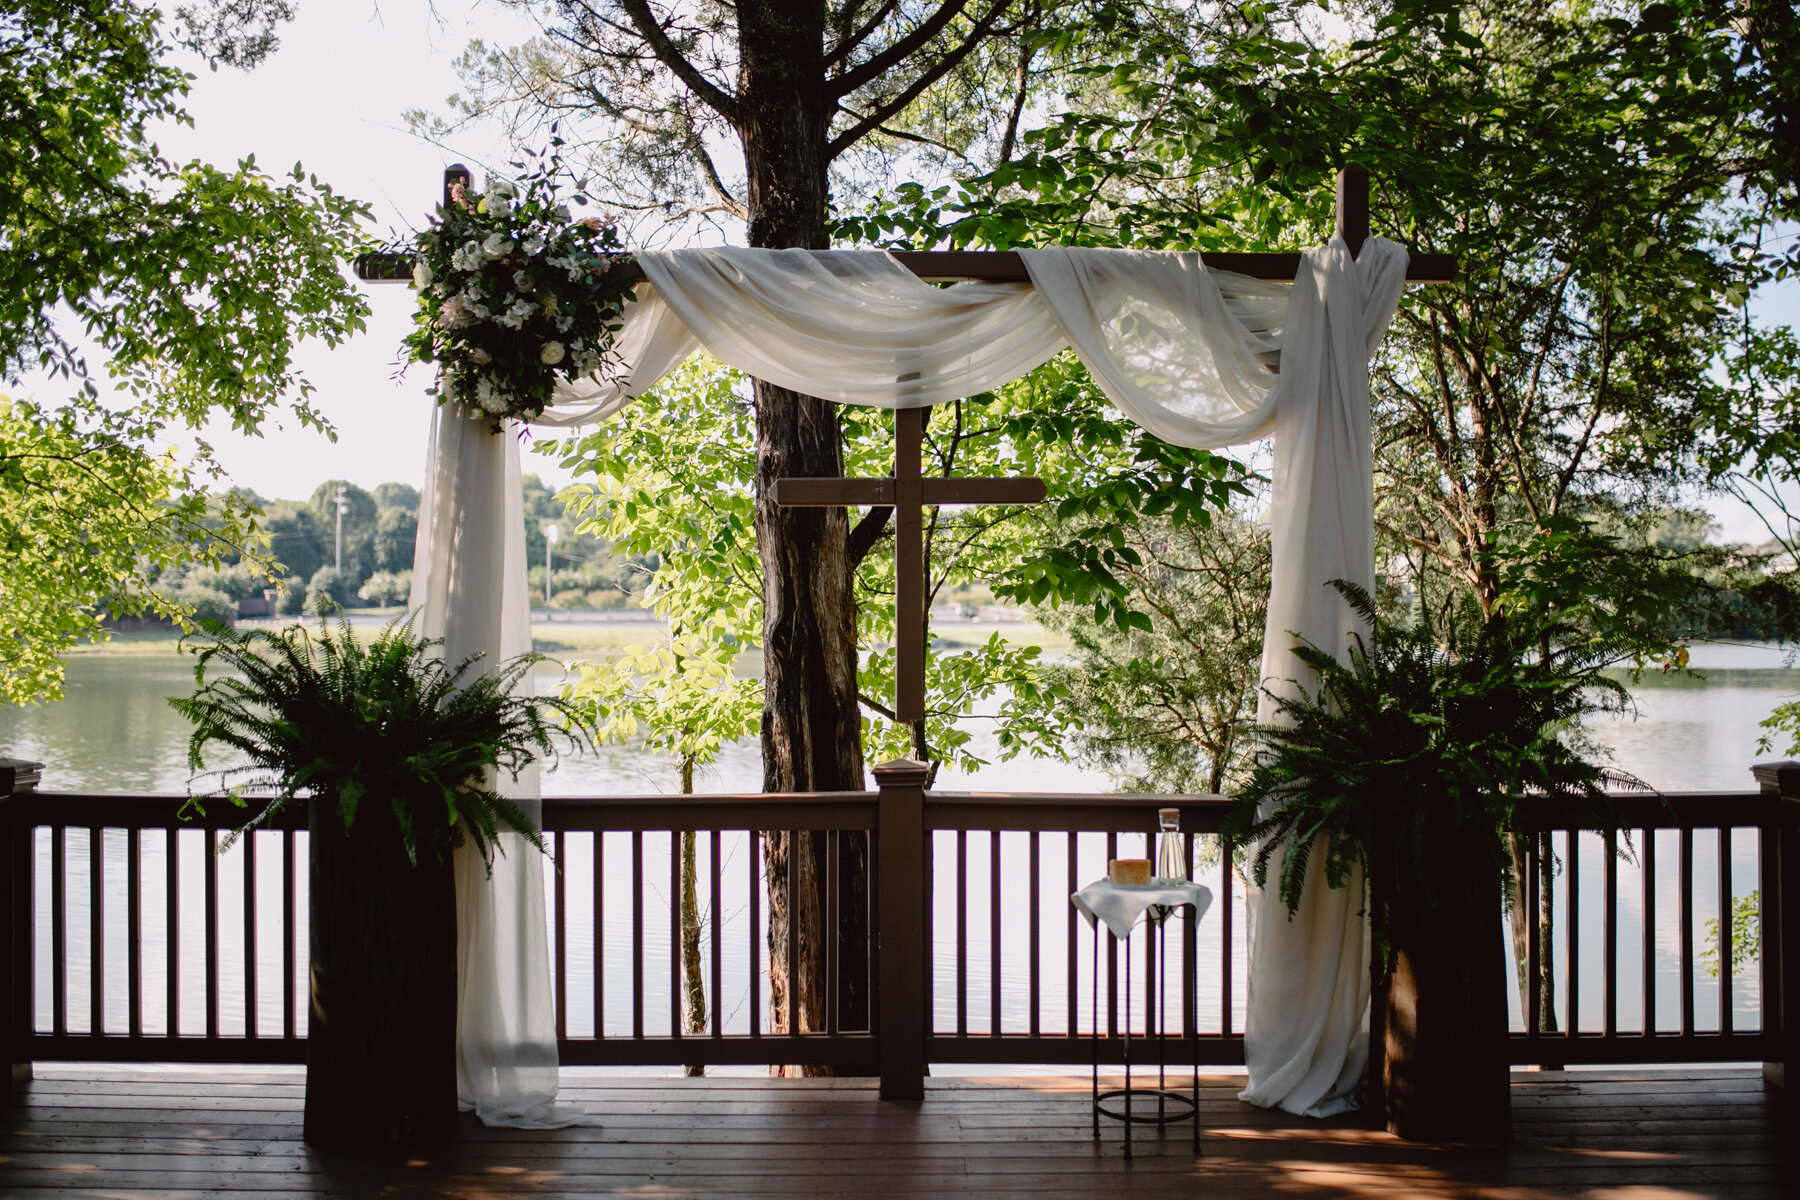 sunny outdoor wedding at hunter valley farms in knoxville tennessee